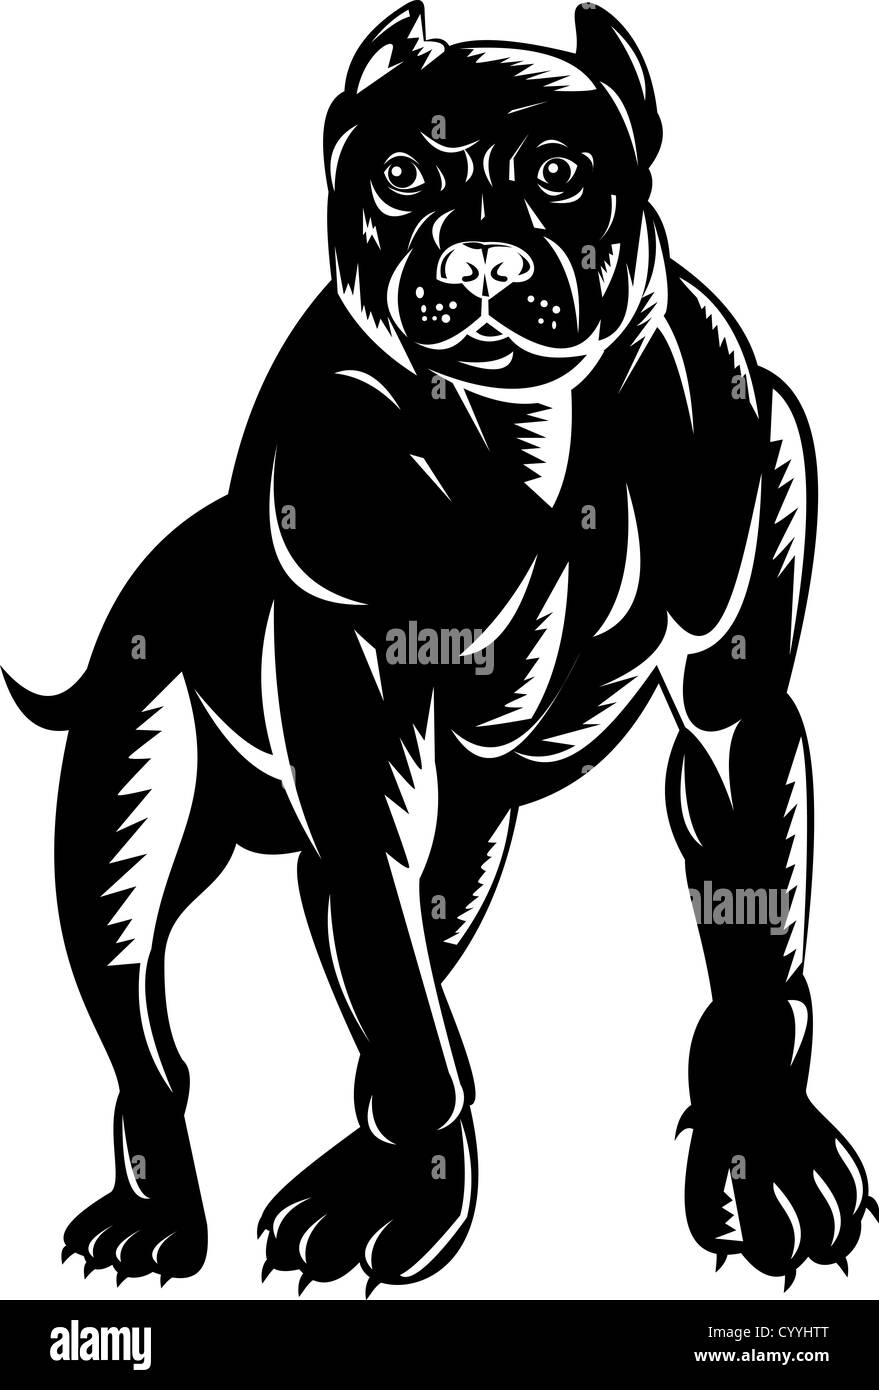 illustration of a pitbull dog done in retro woodcut style. Stock Photo